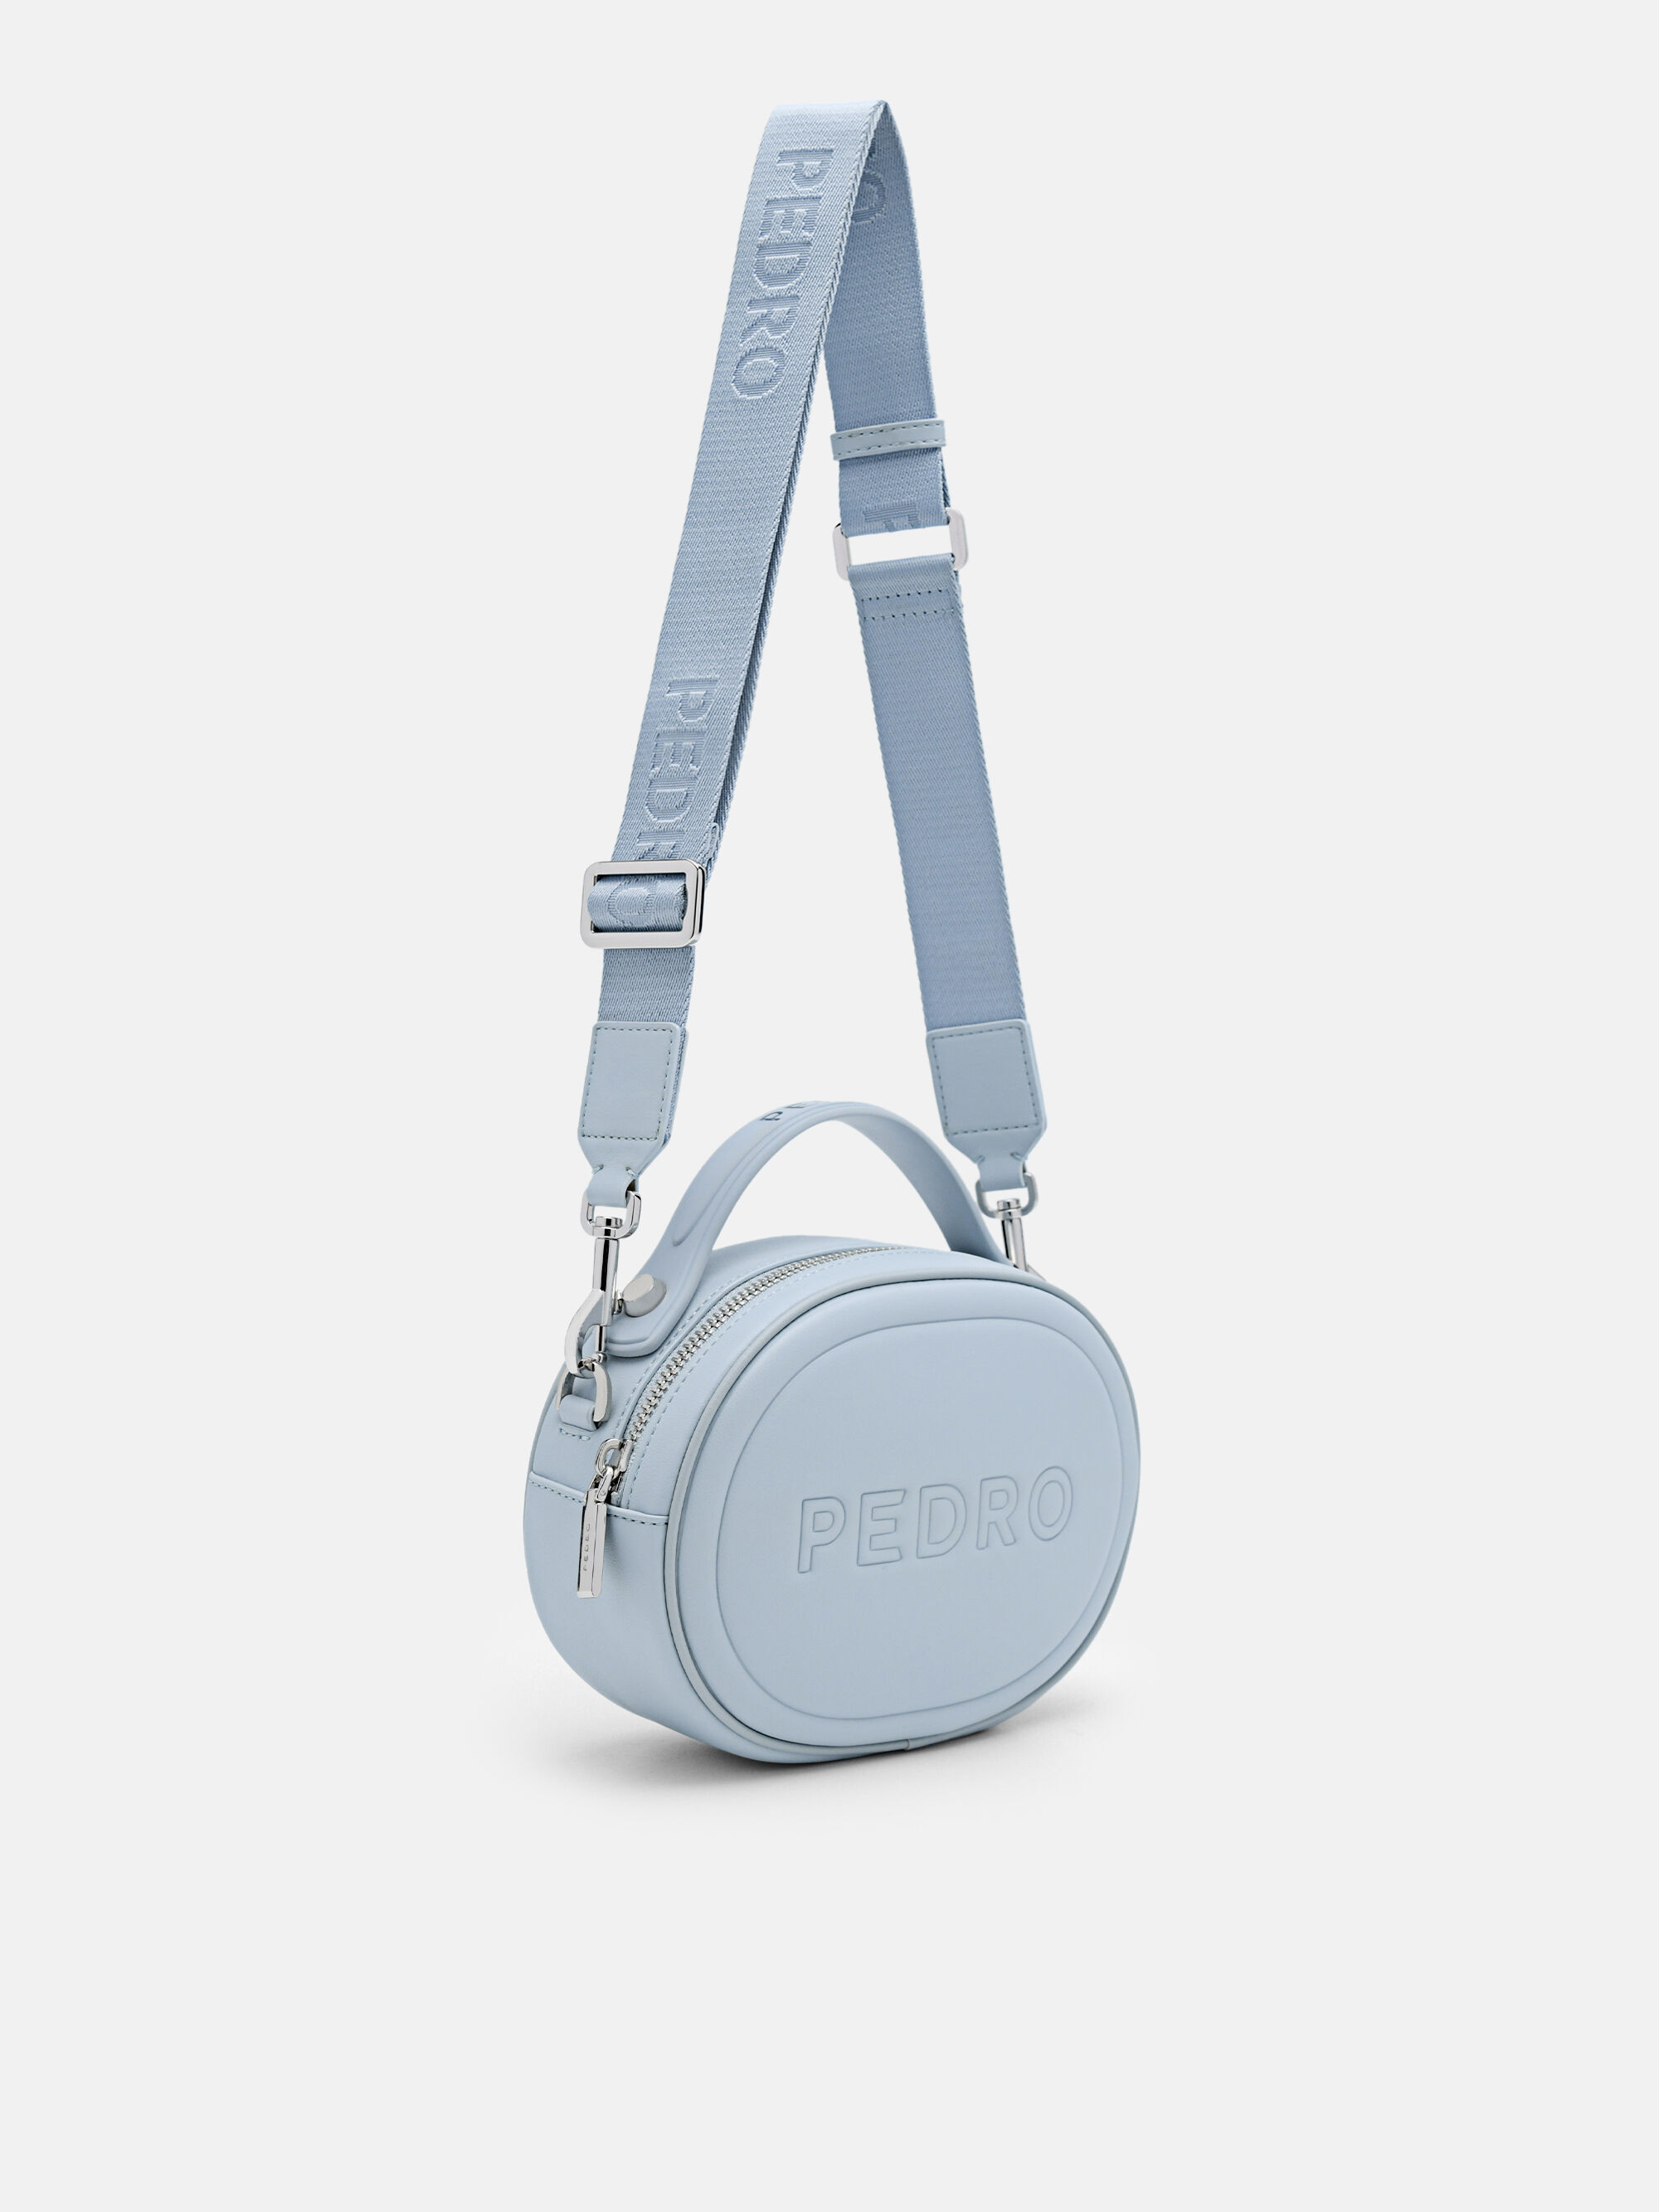 Pedro Bag  Bags, Sling bag, Accessories bags shoes